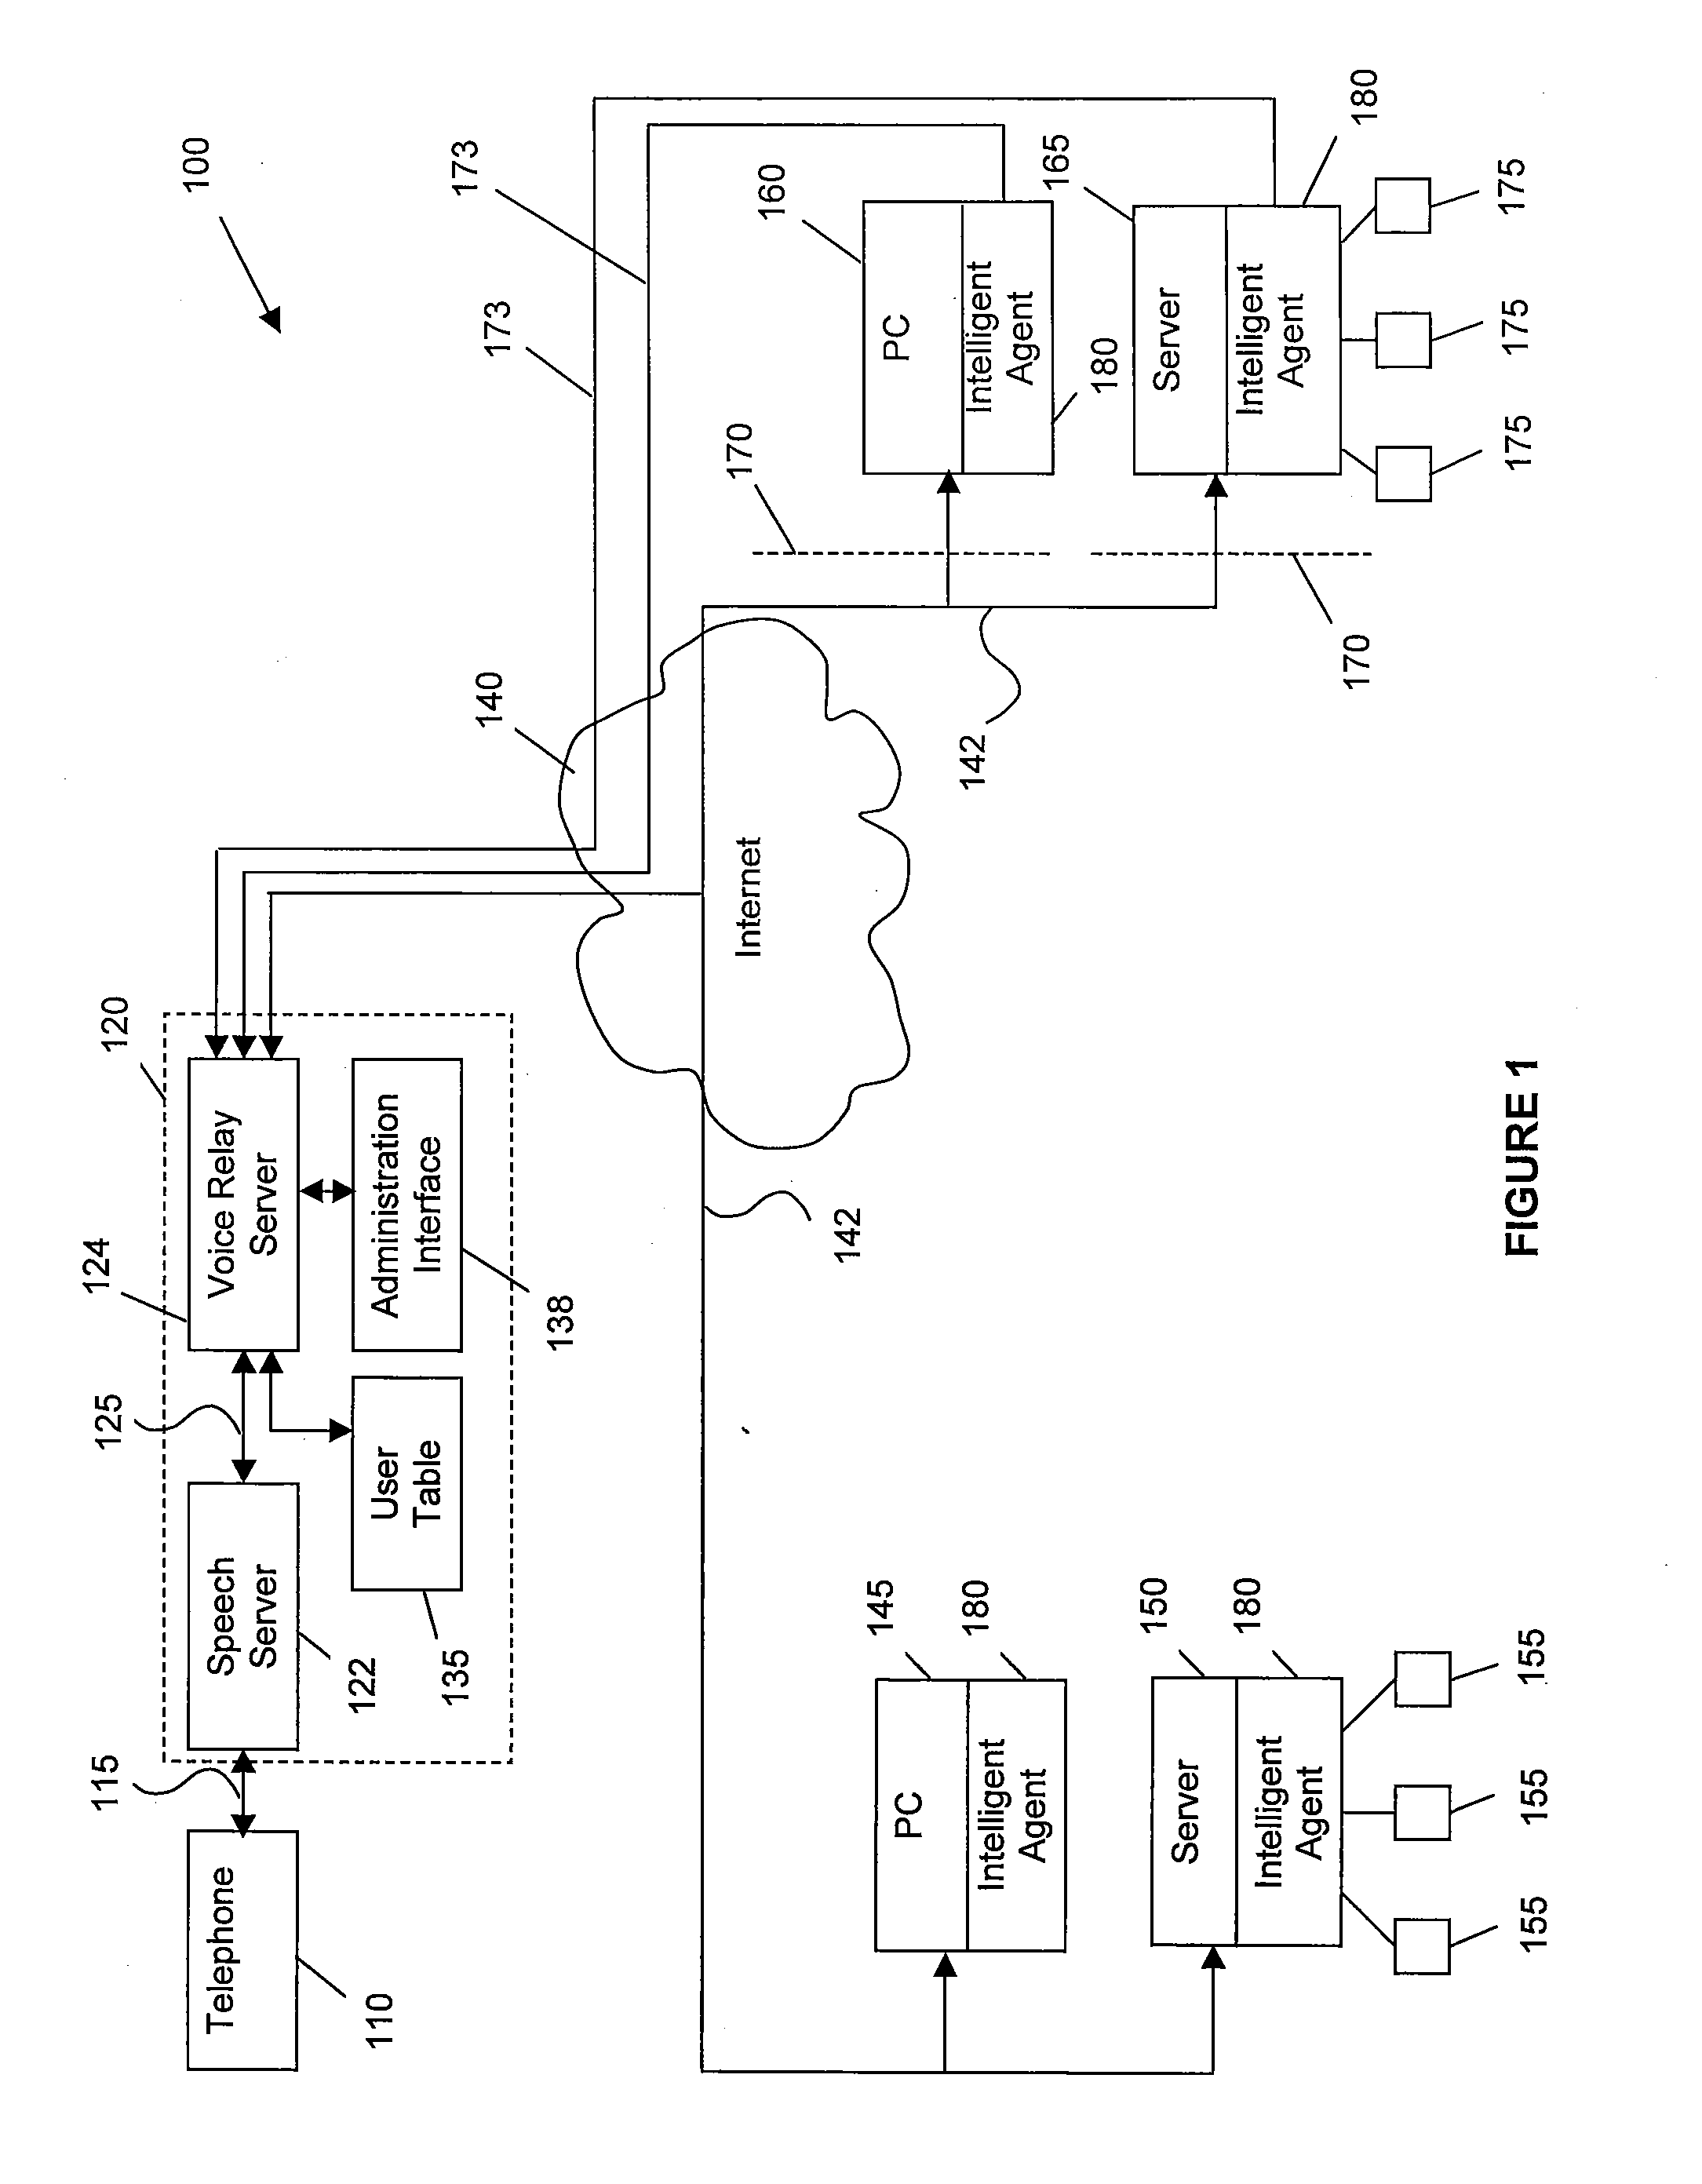 Remote access system and method and intelligent agent therefor